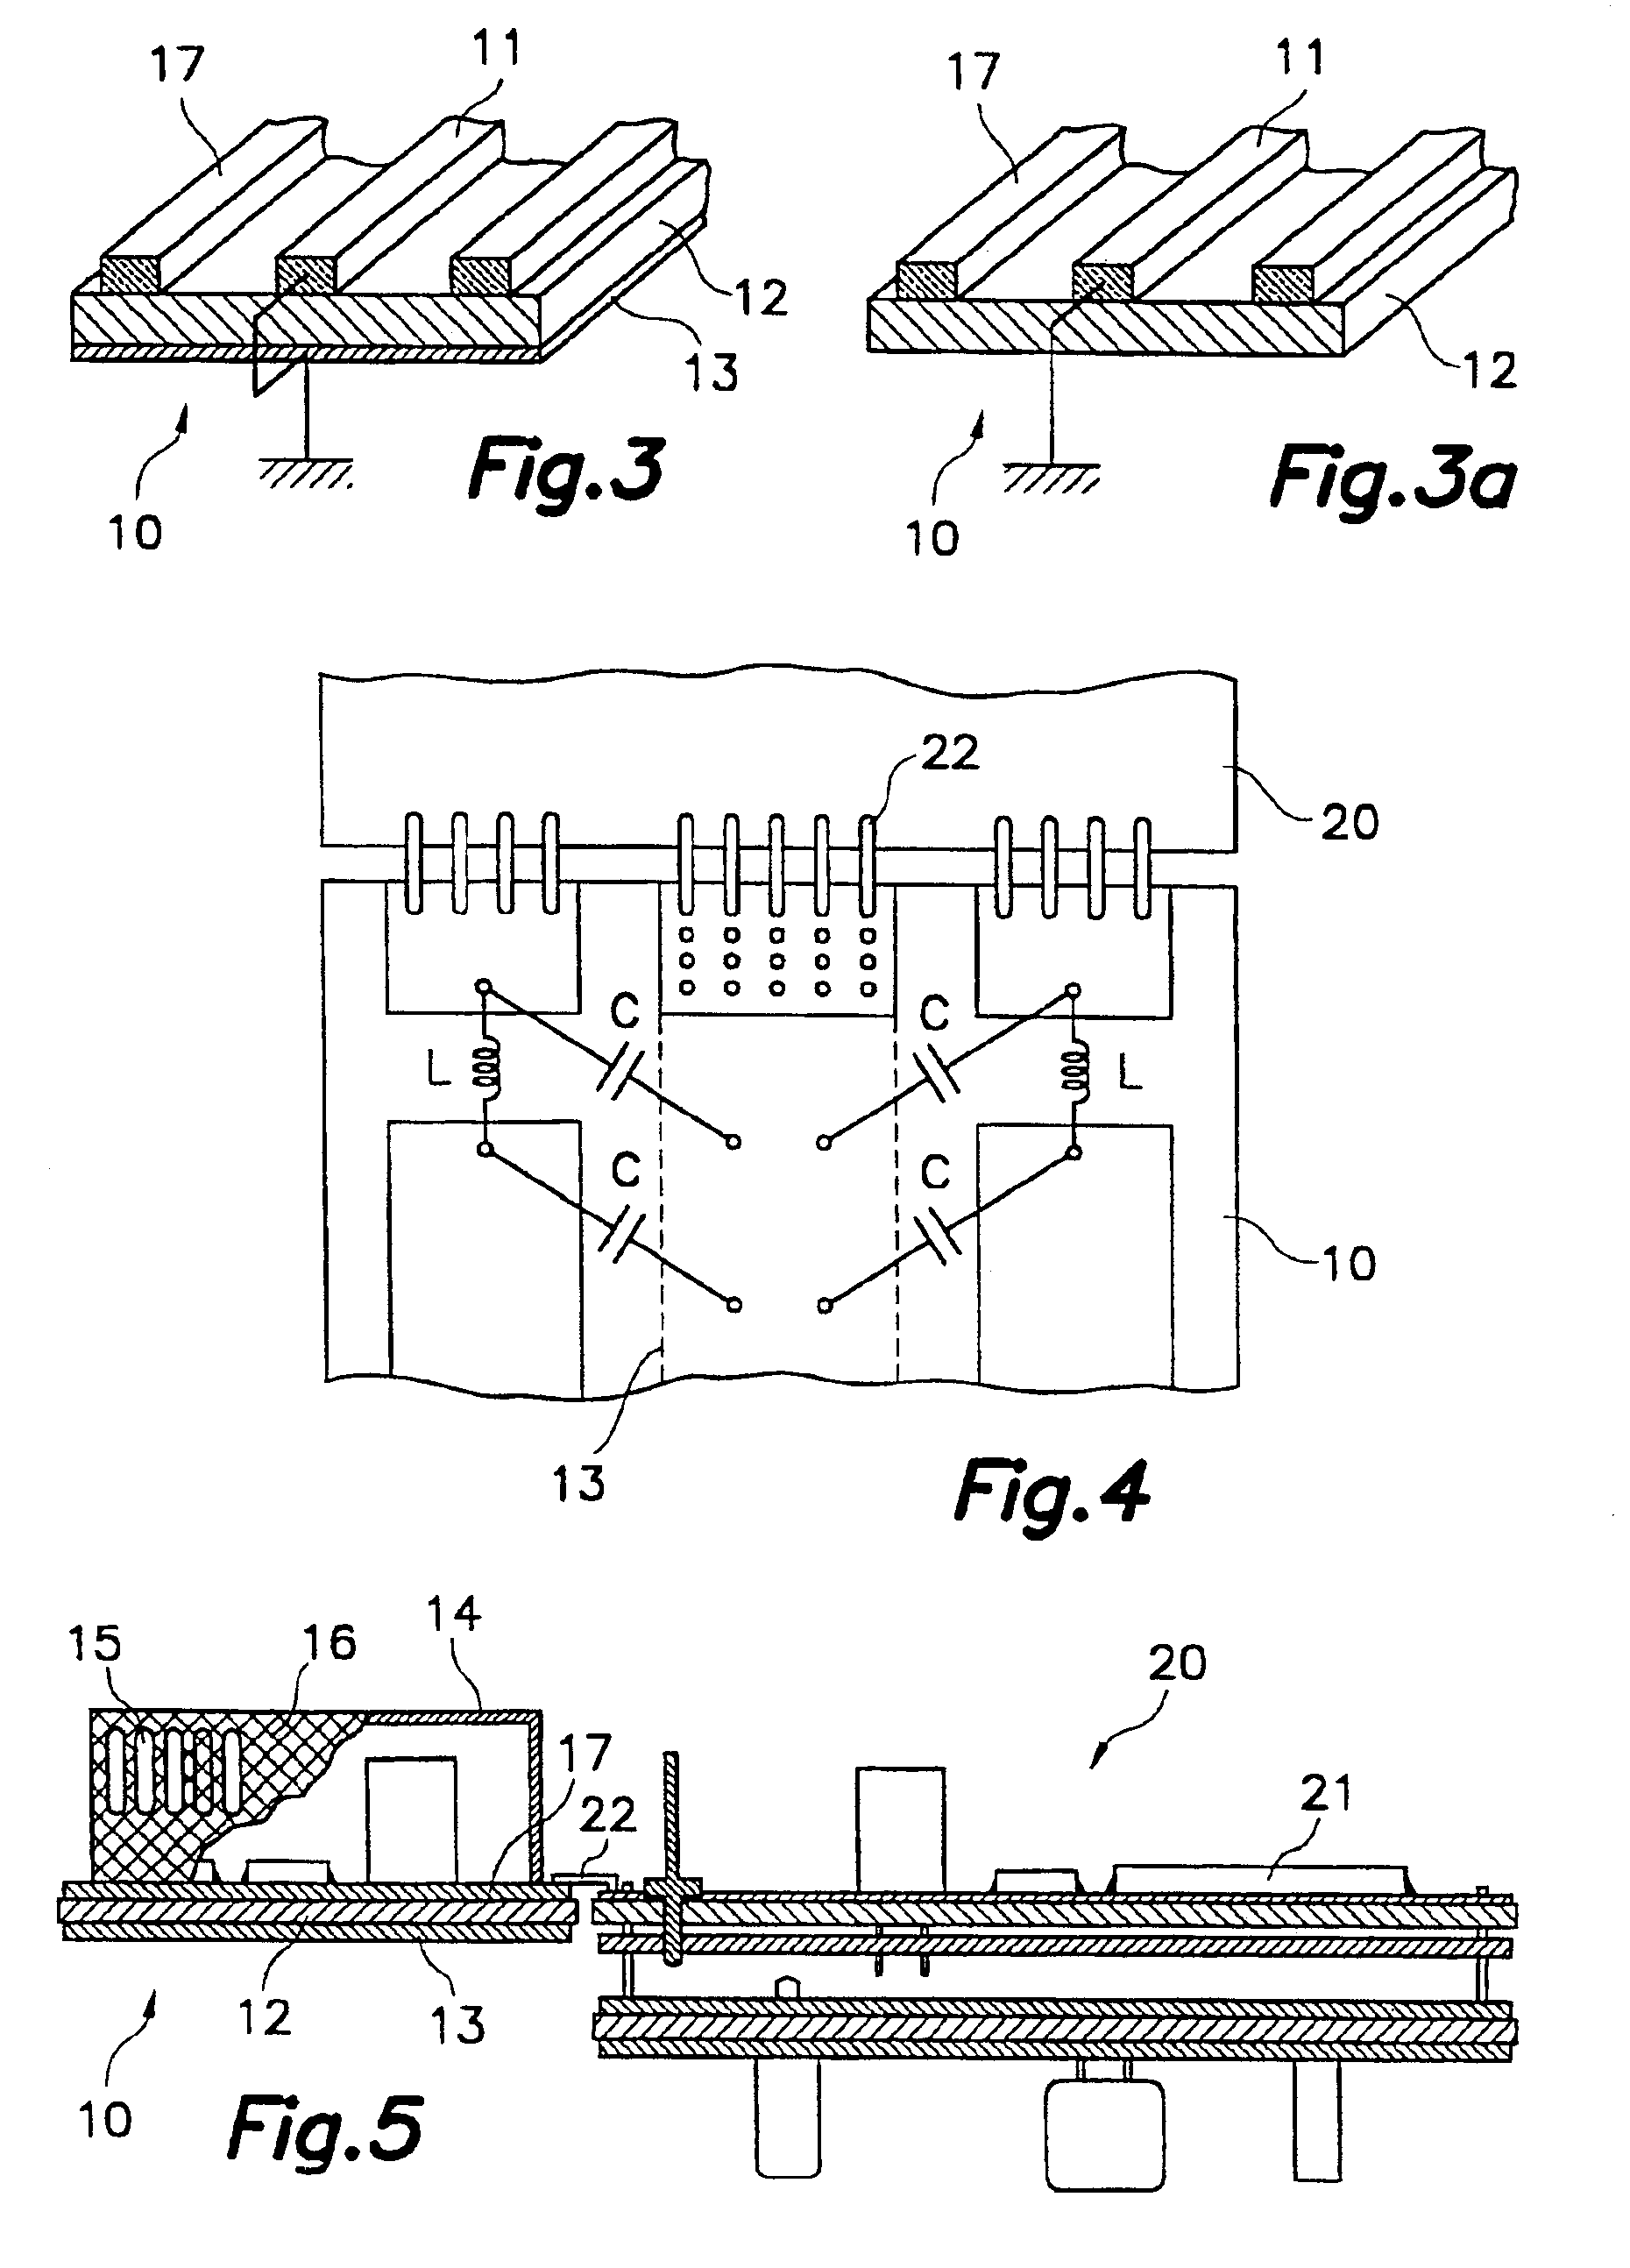 Electrical distribution box for vehicles having two networks with different voltage levels